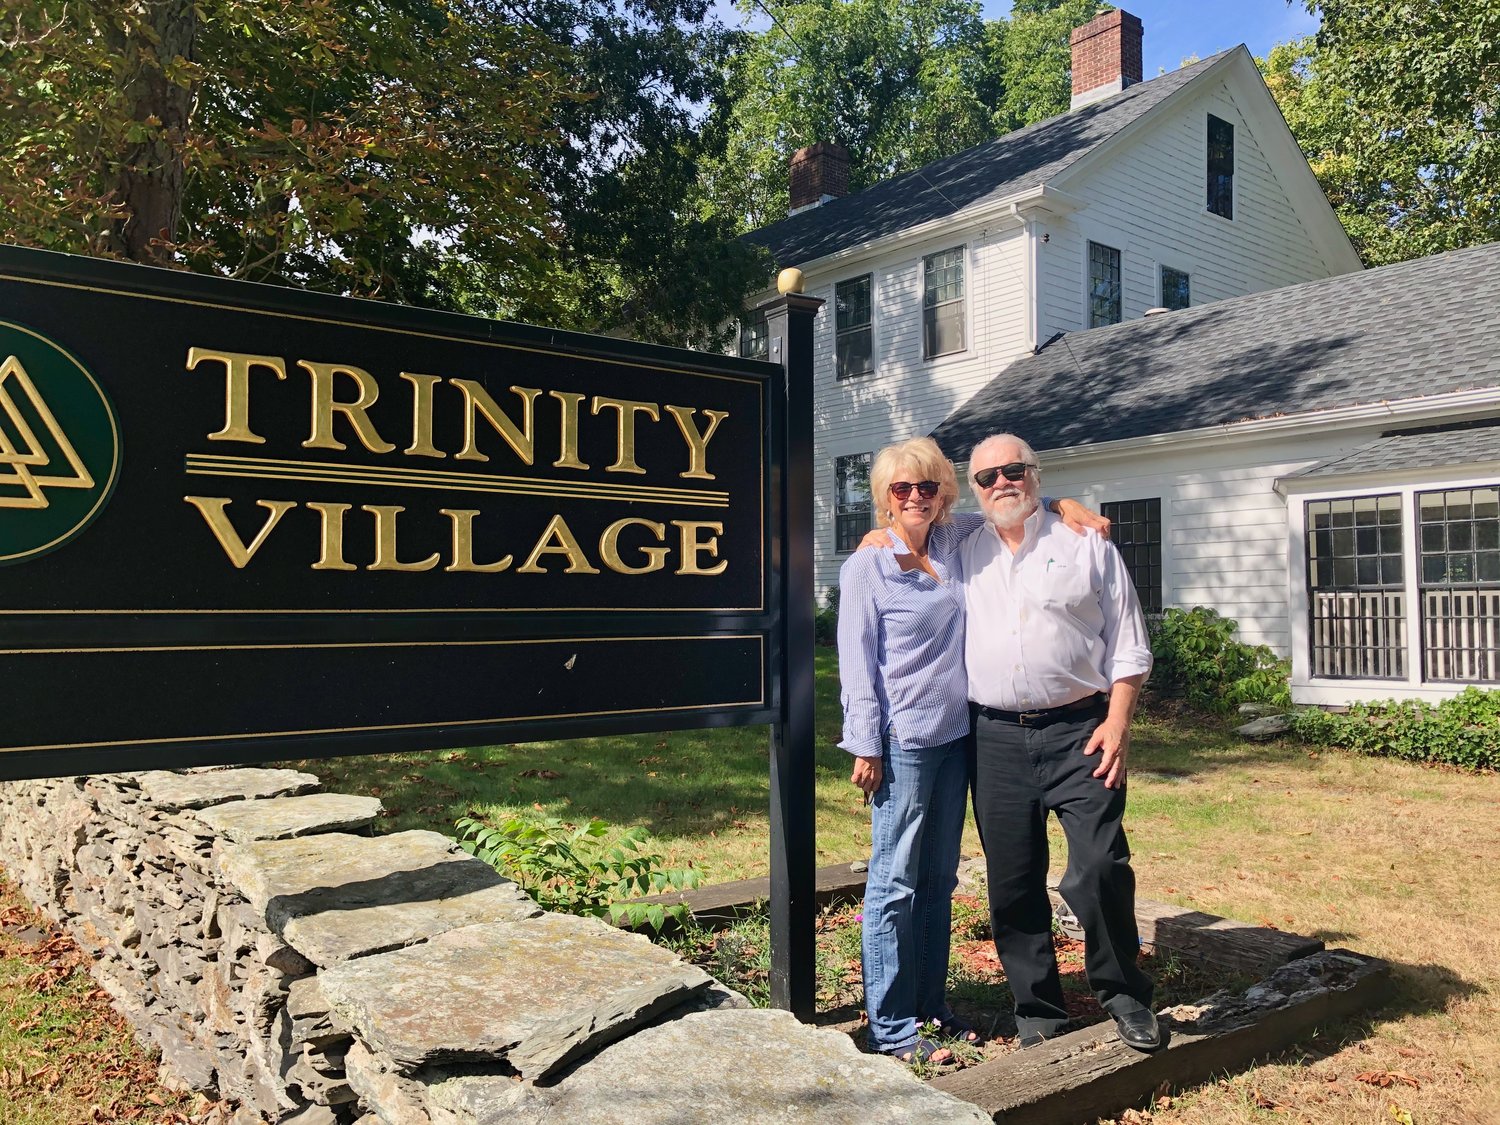 Christine Nolan and James McKenna outside Trinity Village’s Portsmouth home for women and children, Trinity Inn. Ms. Nolan is founder and board chairwoman of Trinity Village, a recovery community, while Mr McKenna is a partner and board member.